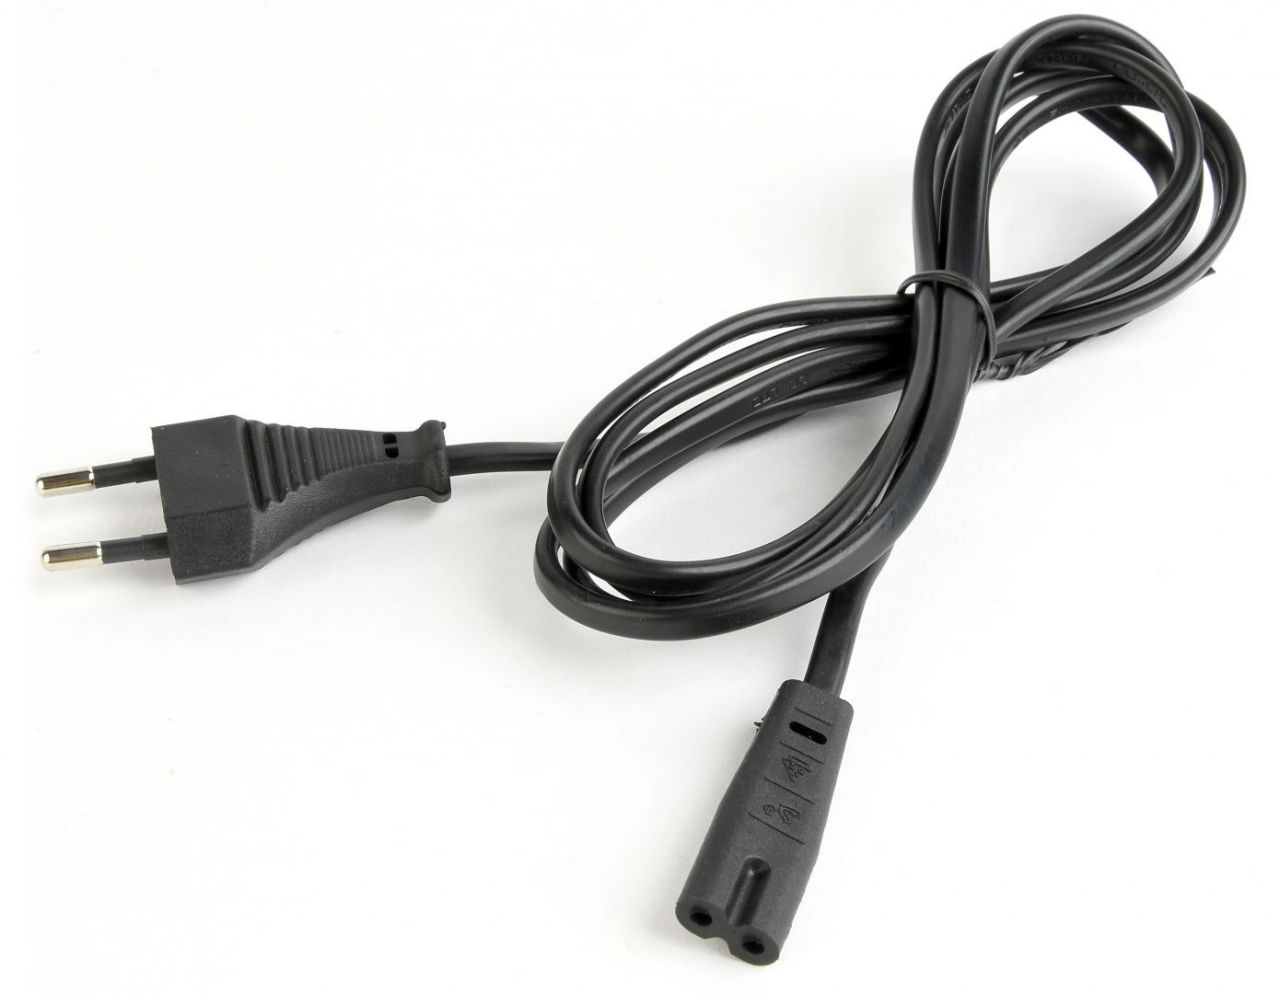 Gembird PC-184-VDE Power cord VDE approved 1,8m Black